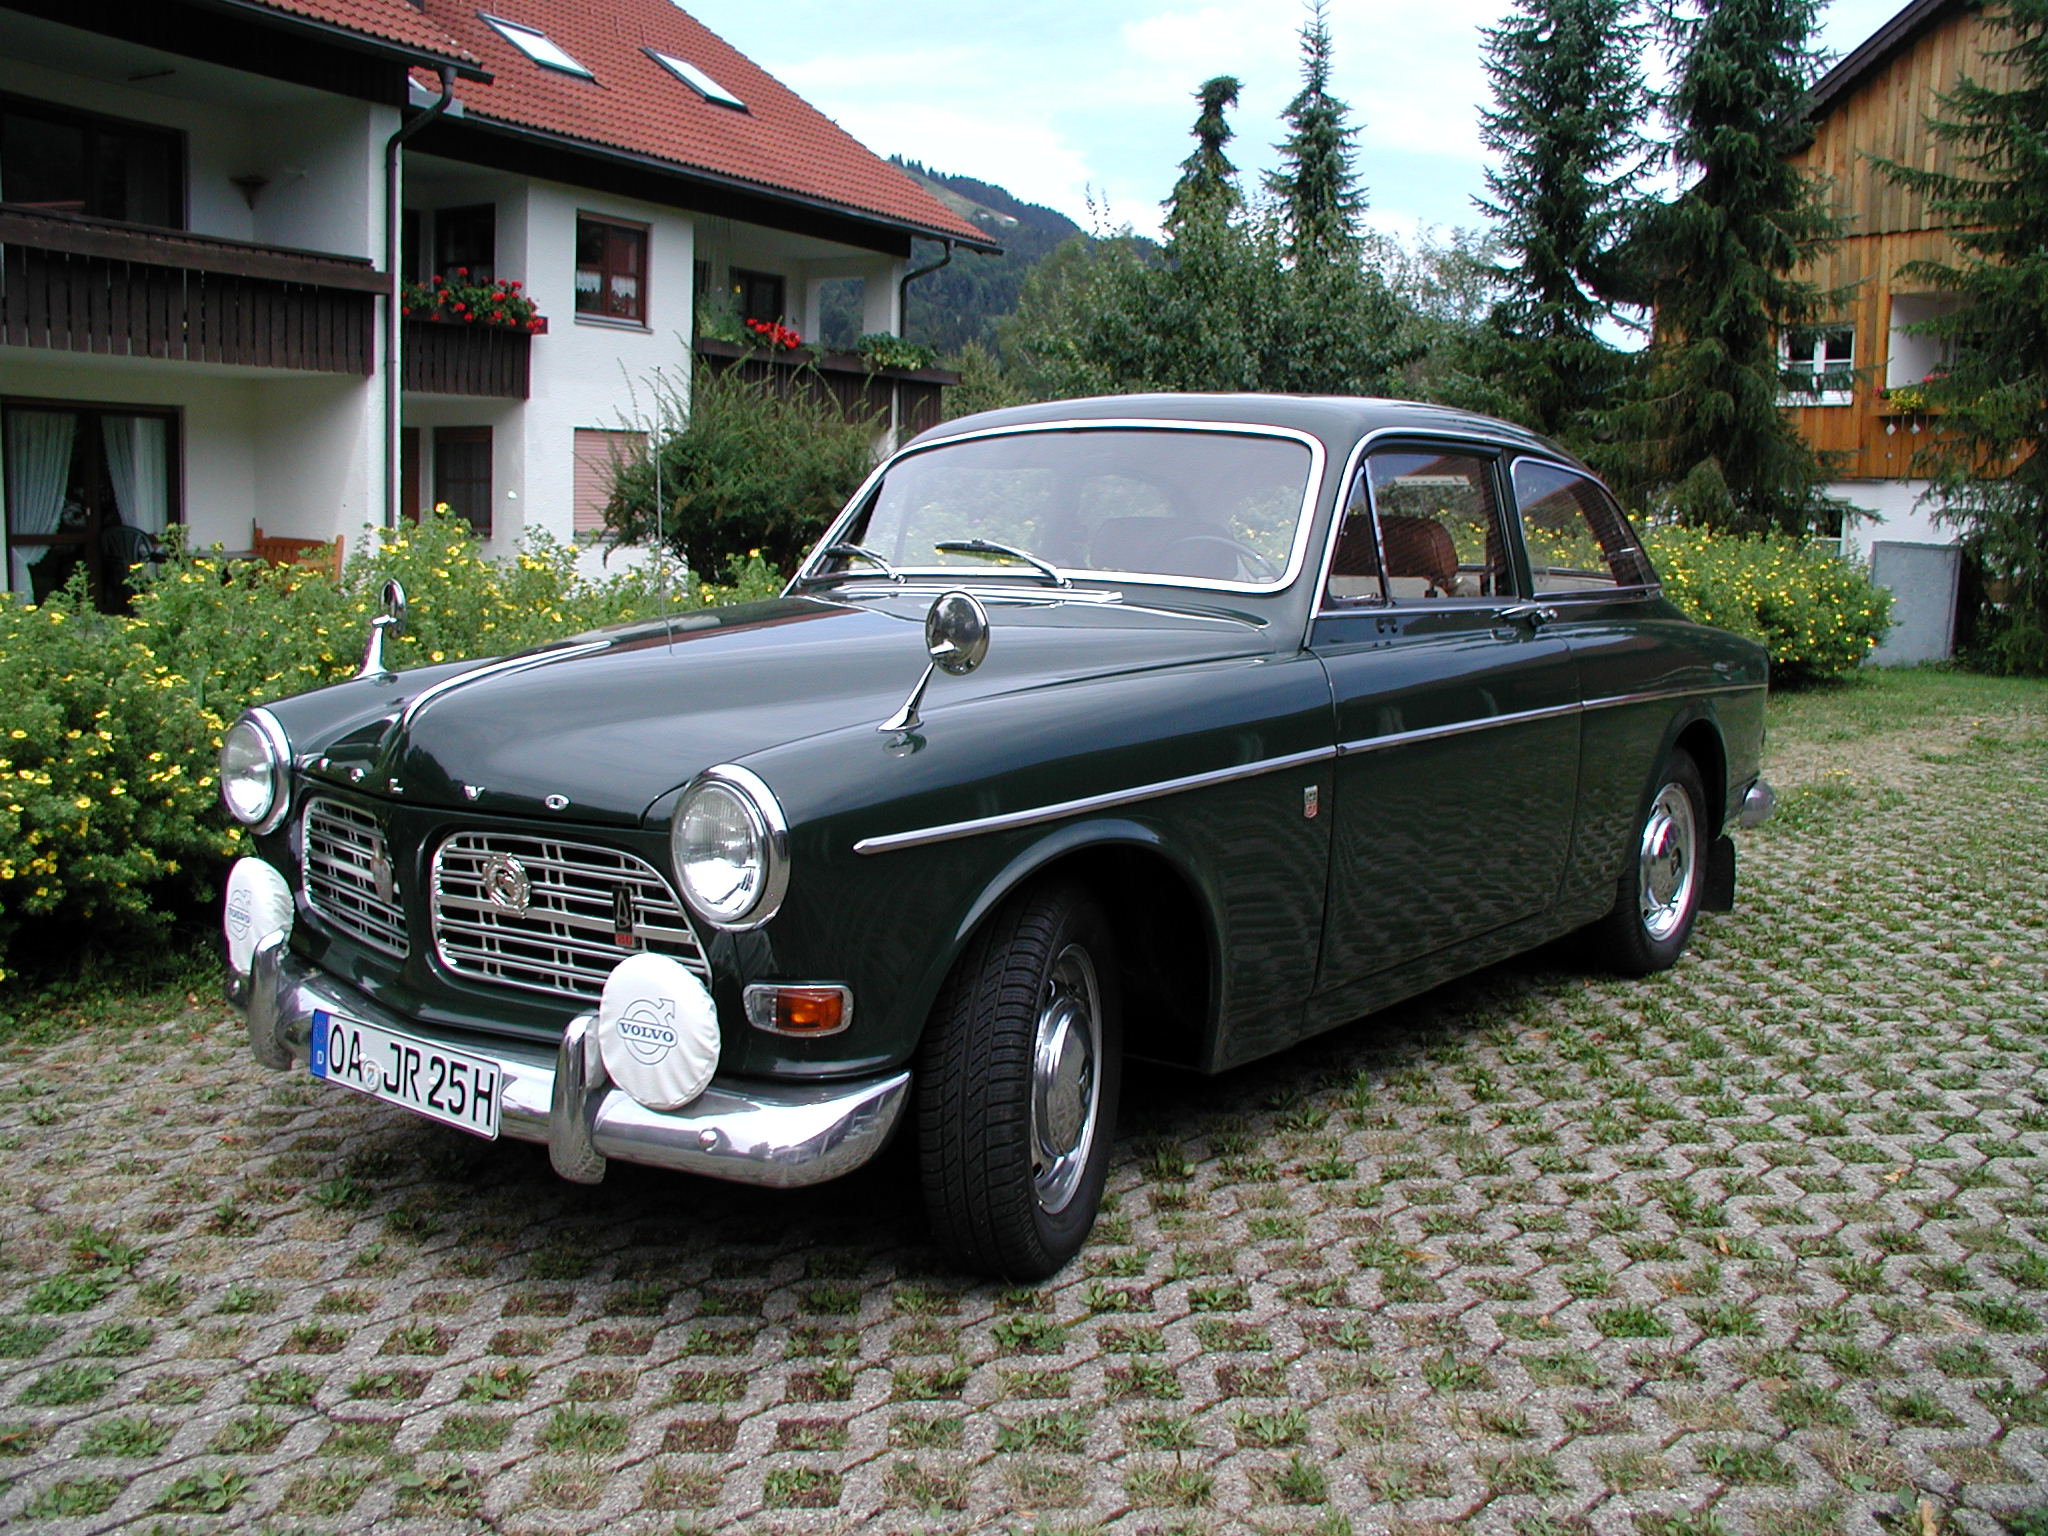 1969 Volvo Amazon 123GT The 123GT for Swiss market had two fog lights and